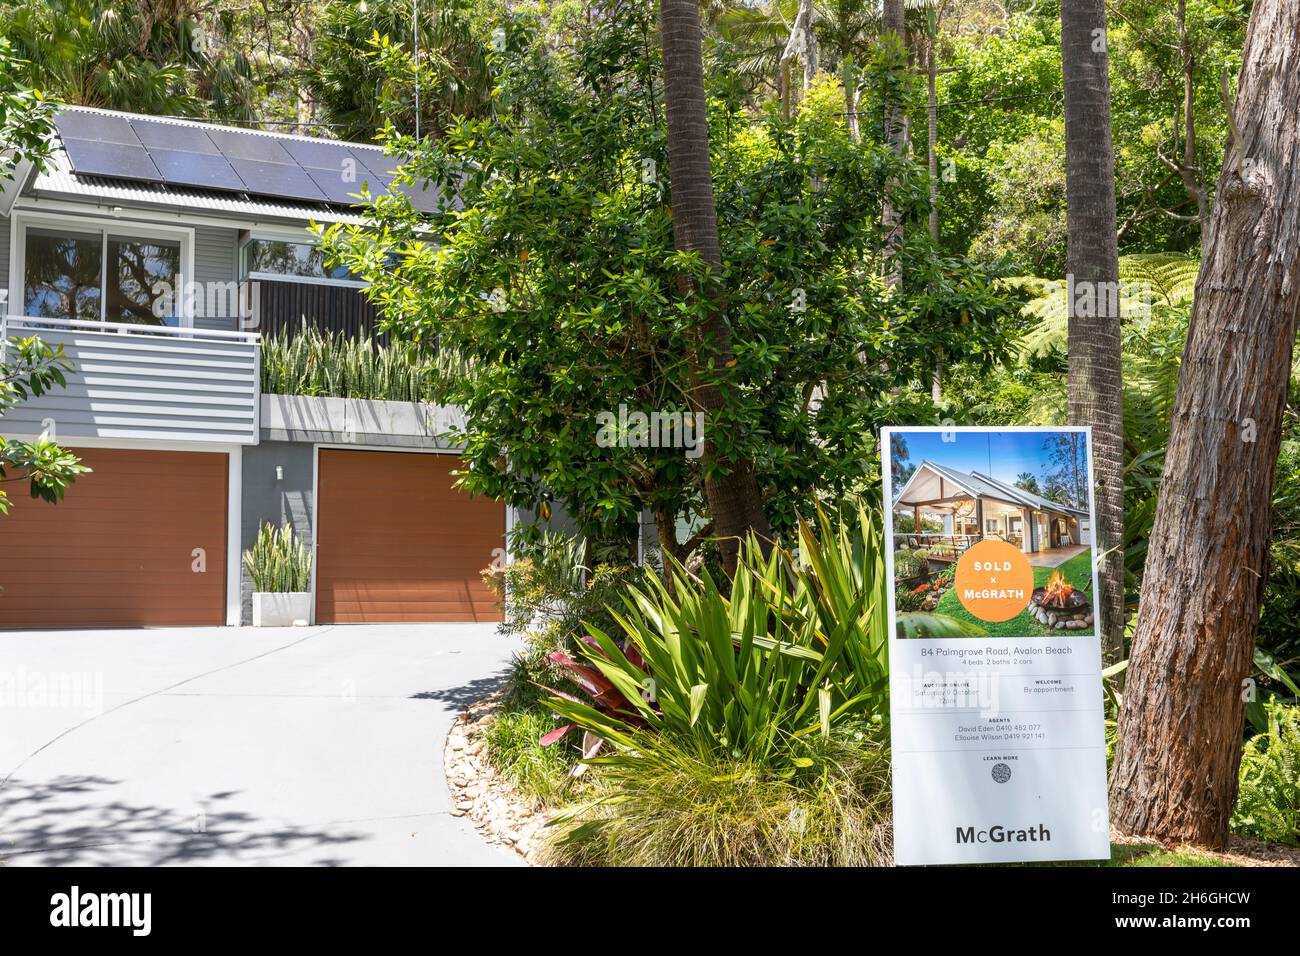 Sydney detached home in Avalon Beach just sold by real estate agent,Sydney,Australia property sale Stock Photo